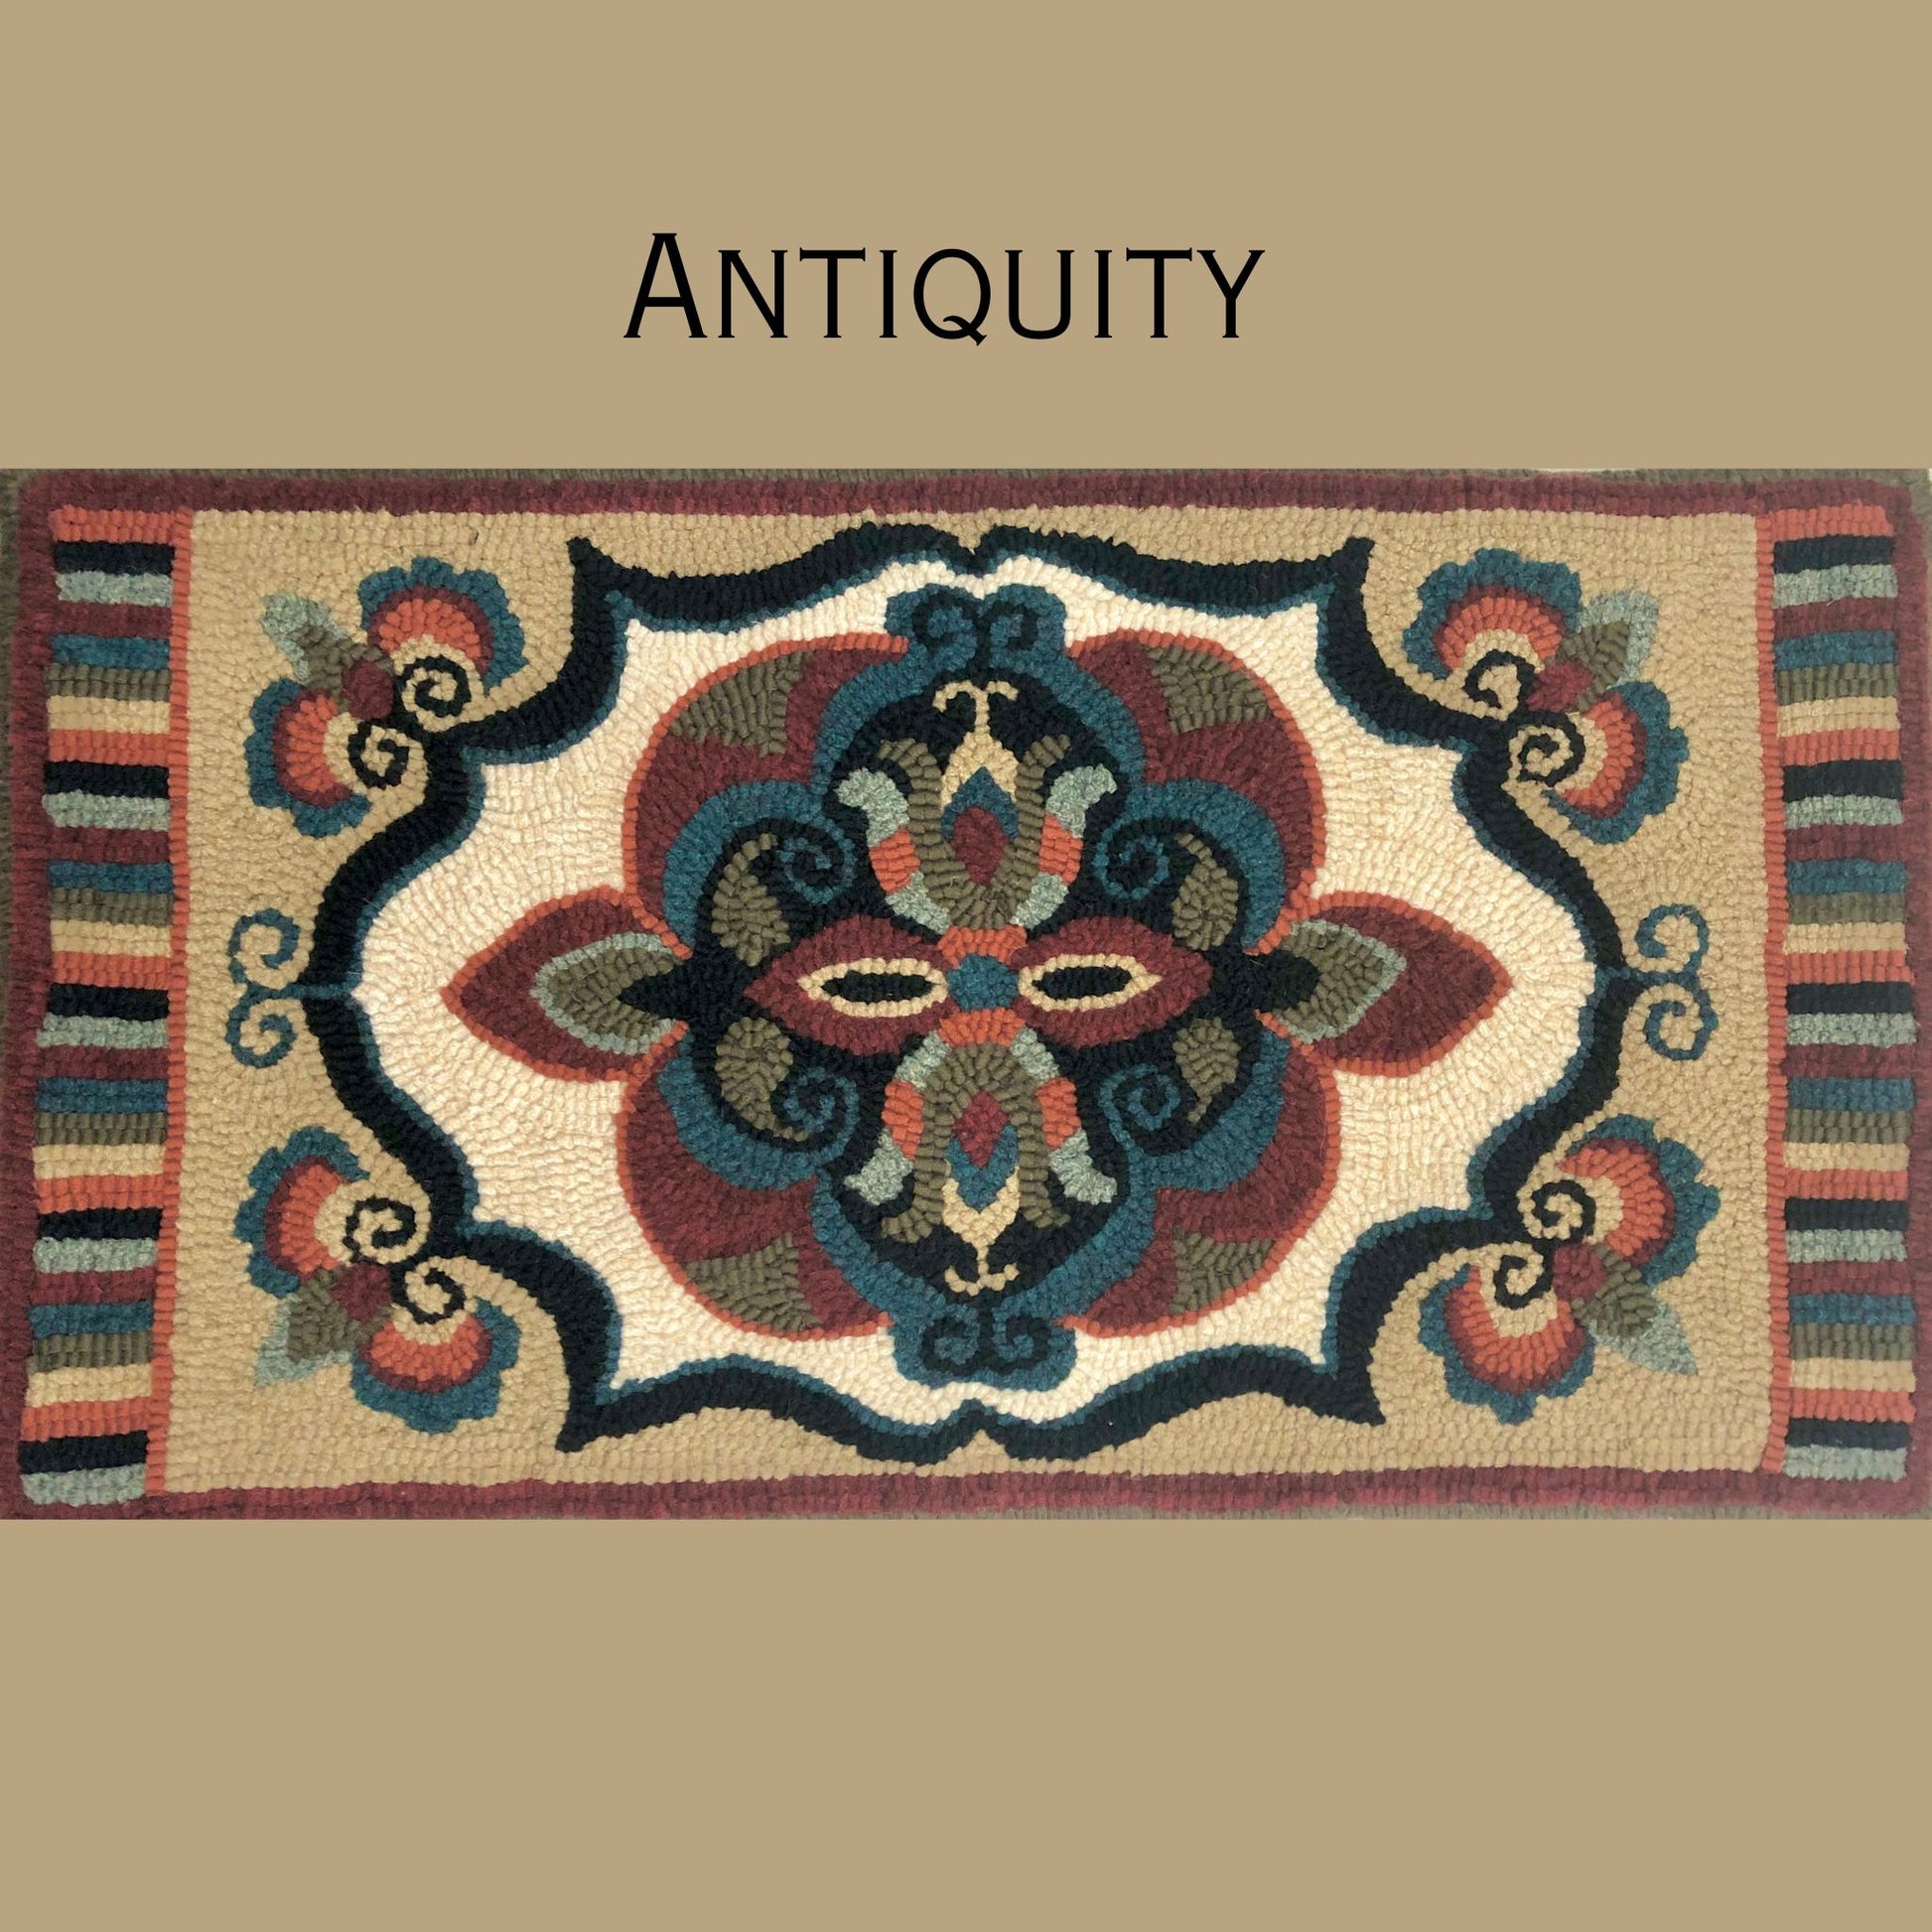  Antiquity - Rug Hooking pattern on Linen, Design By Orphaned Wool